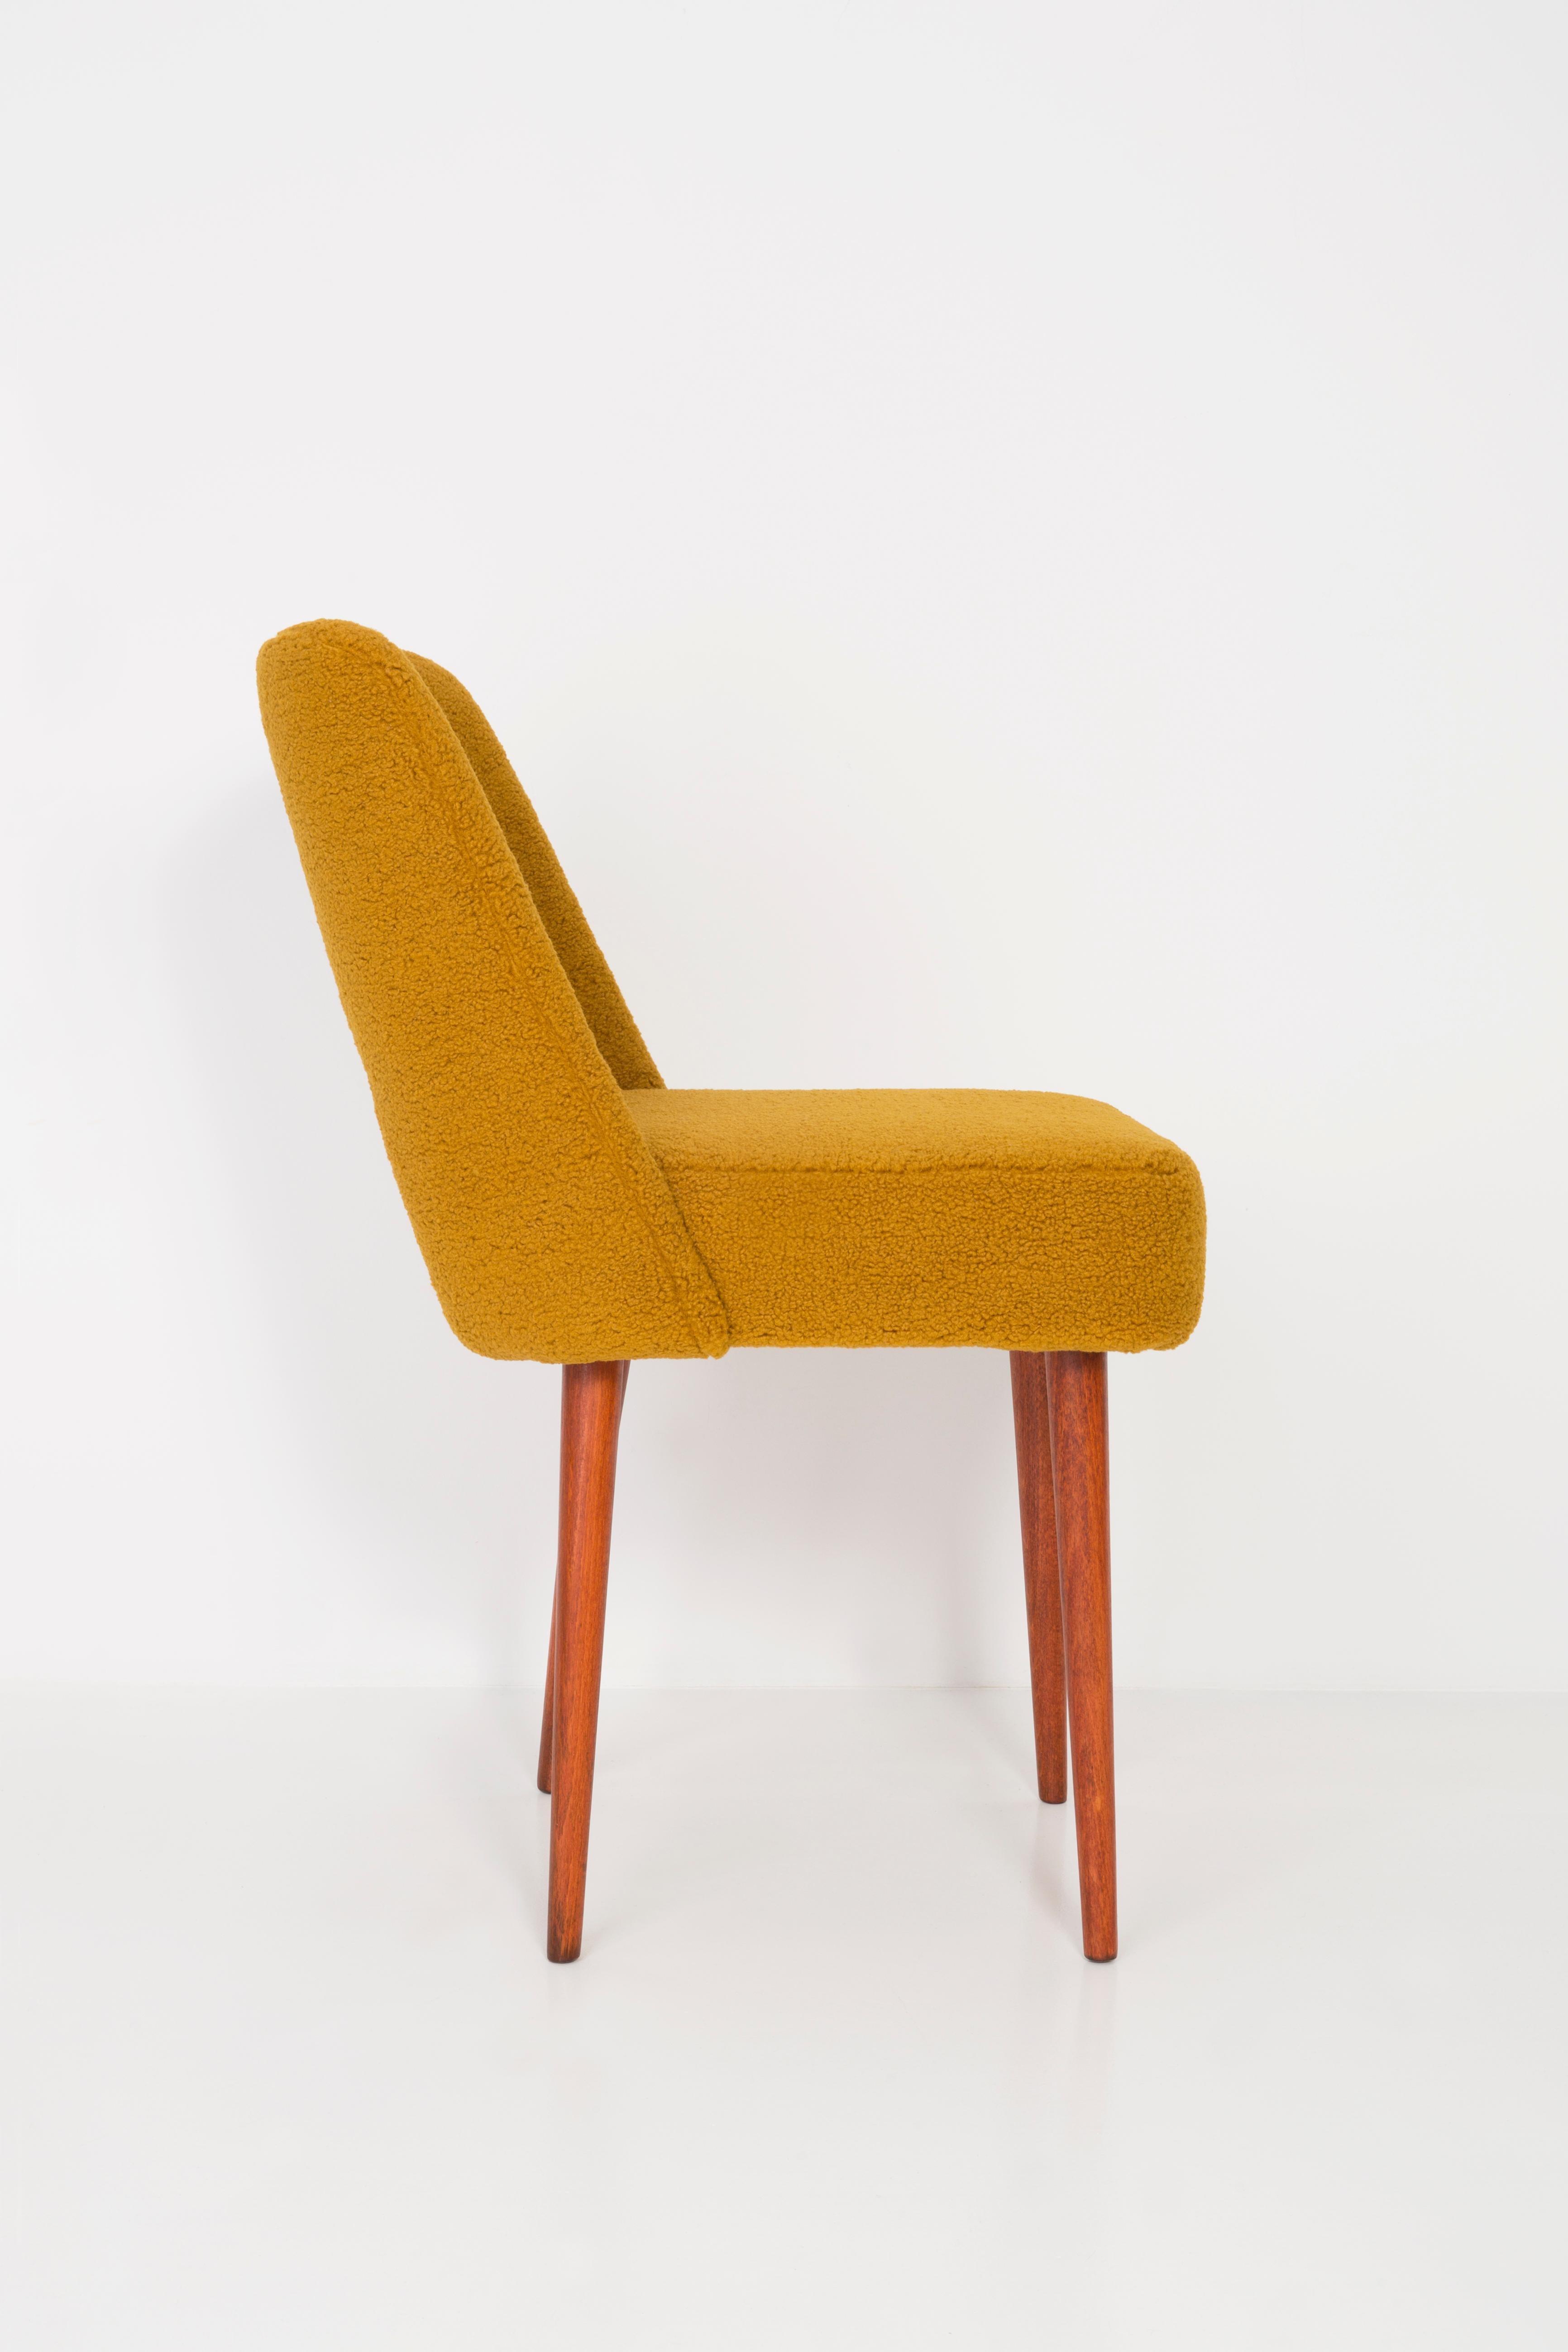 Polish Set of Four Yellow Ochre Boucle 'Shell' Chairs, 1960s For Sale